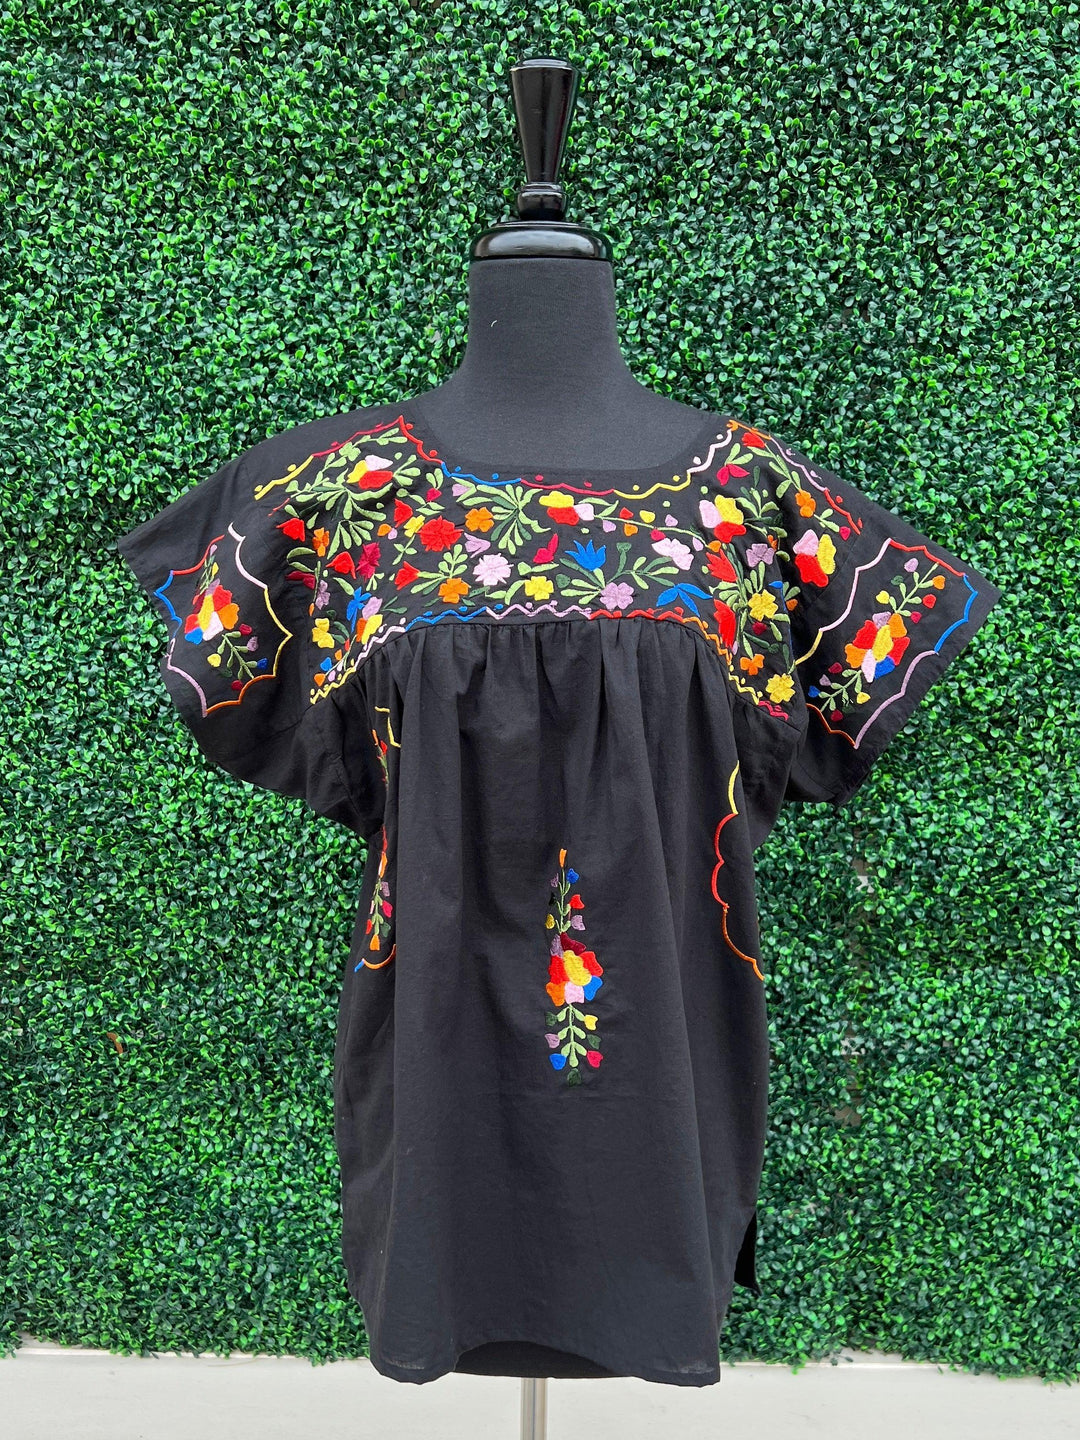 Anu natural fashions 100% cotton embroidered top black